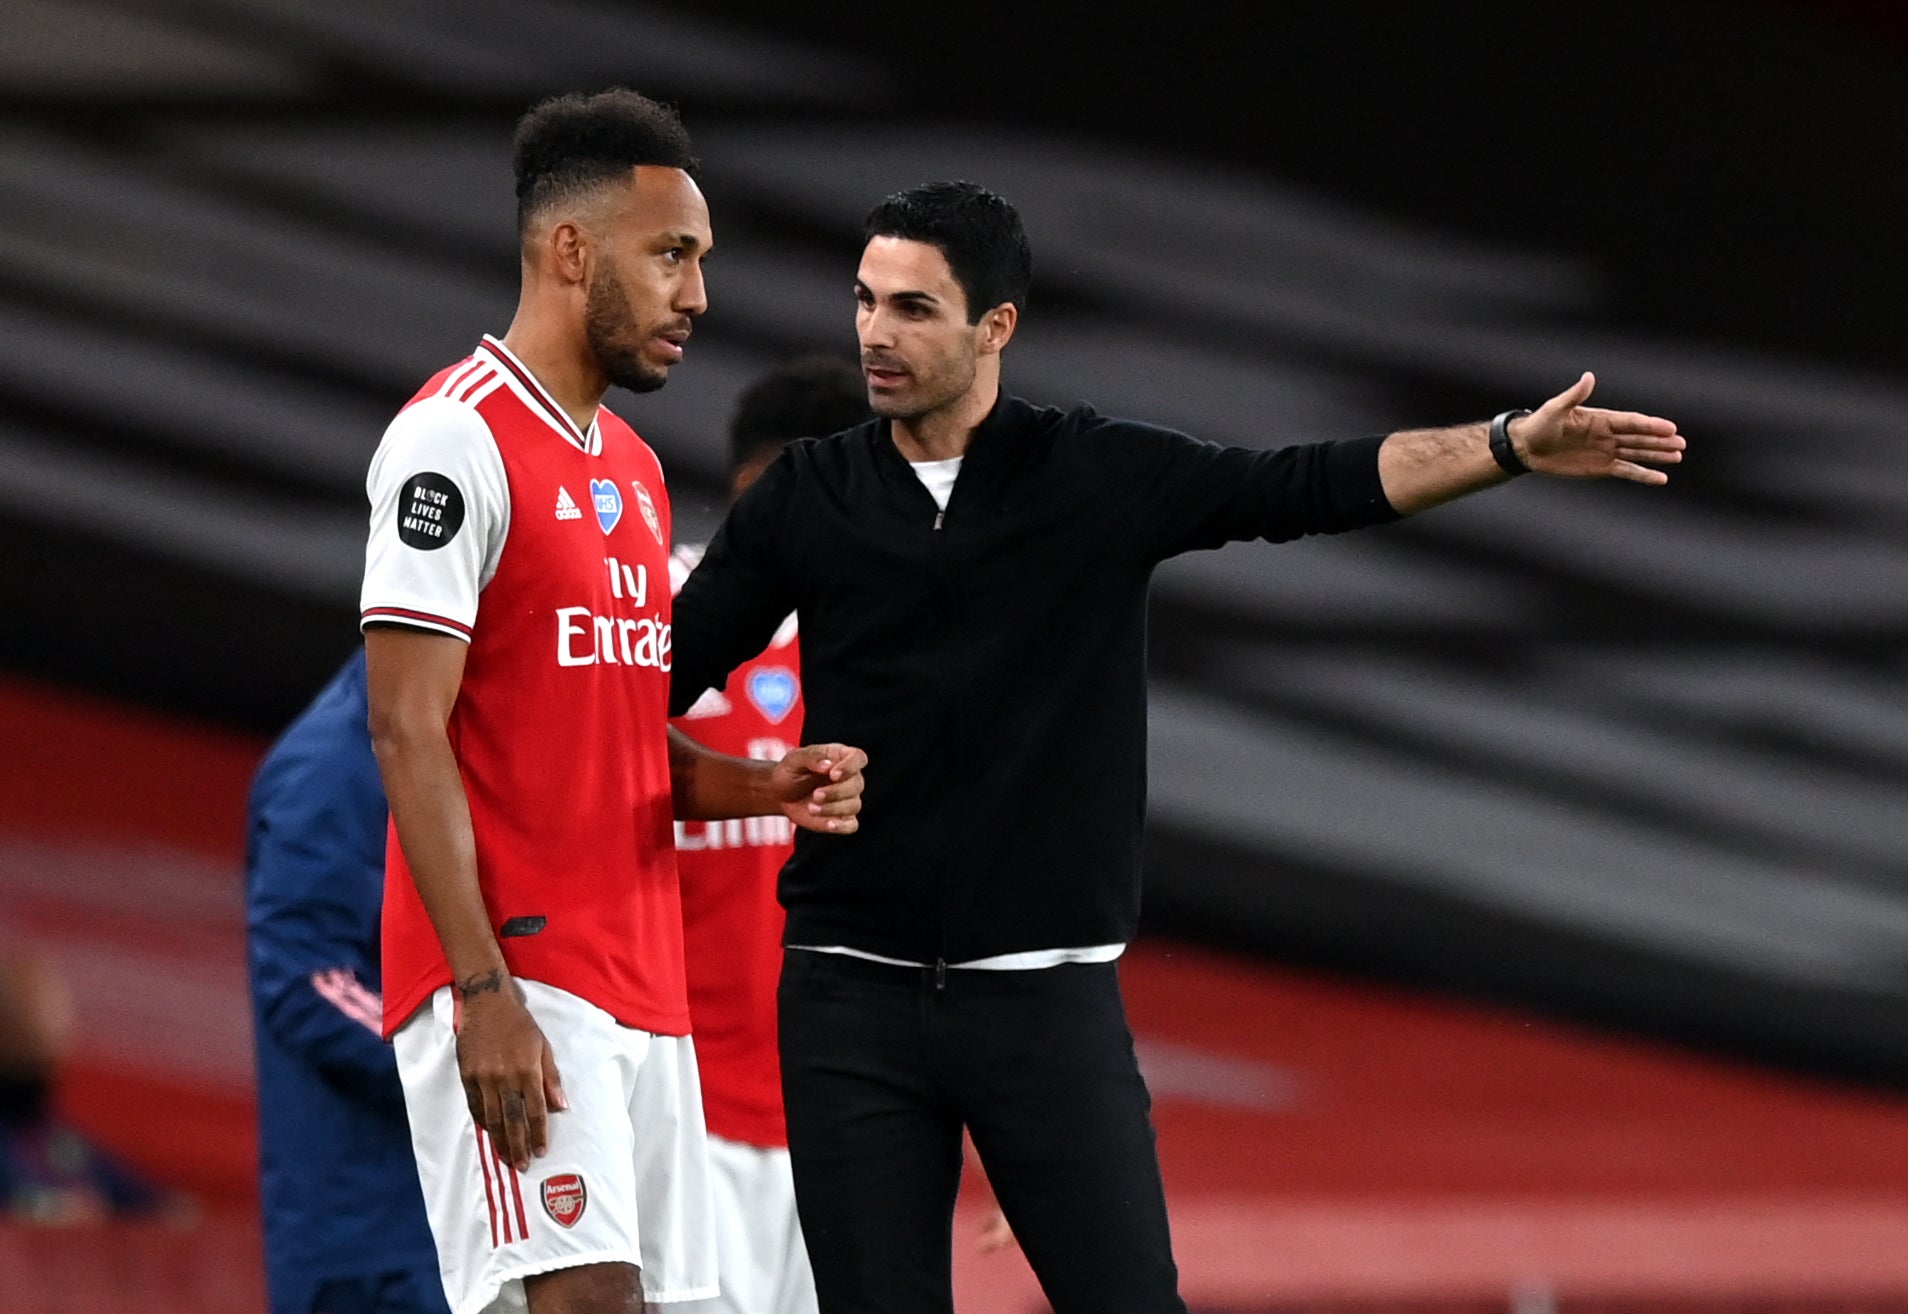 Arsenal manager Mikel Arteta (right) dropped Aubameyang following a disciplinary issue